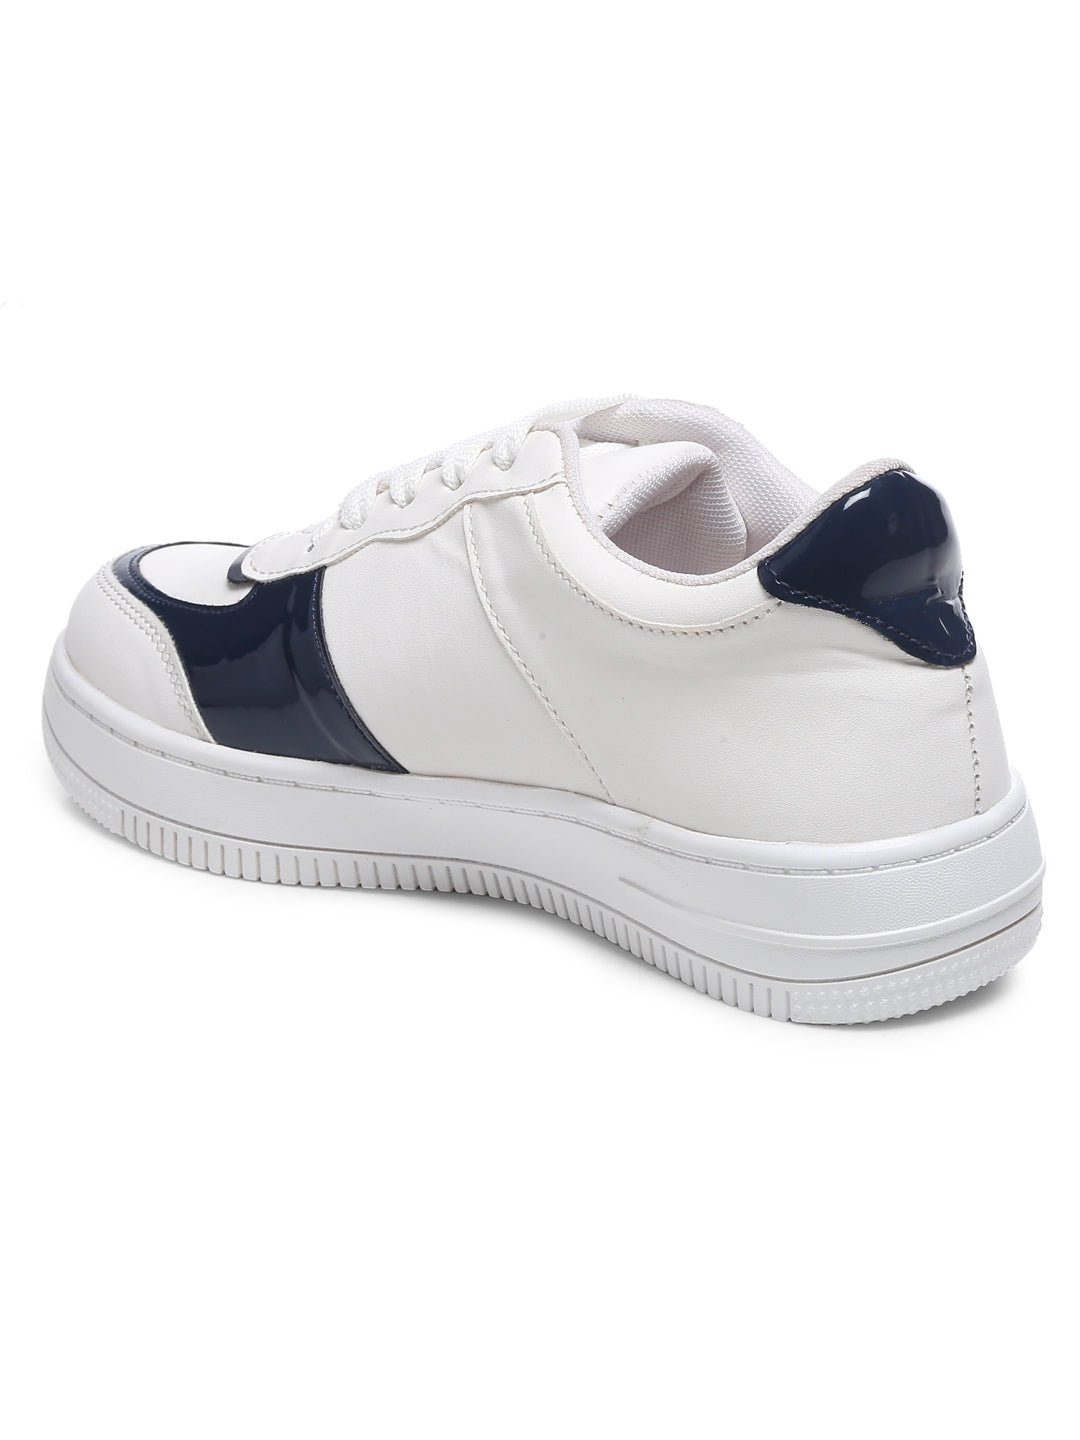 GNIST White Navy Colour Blocked Sneakers